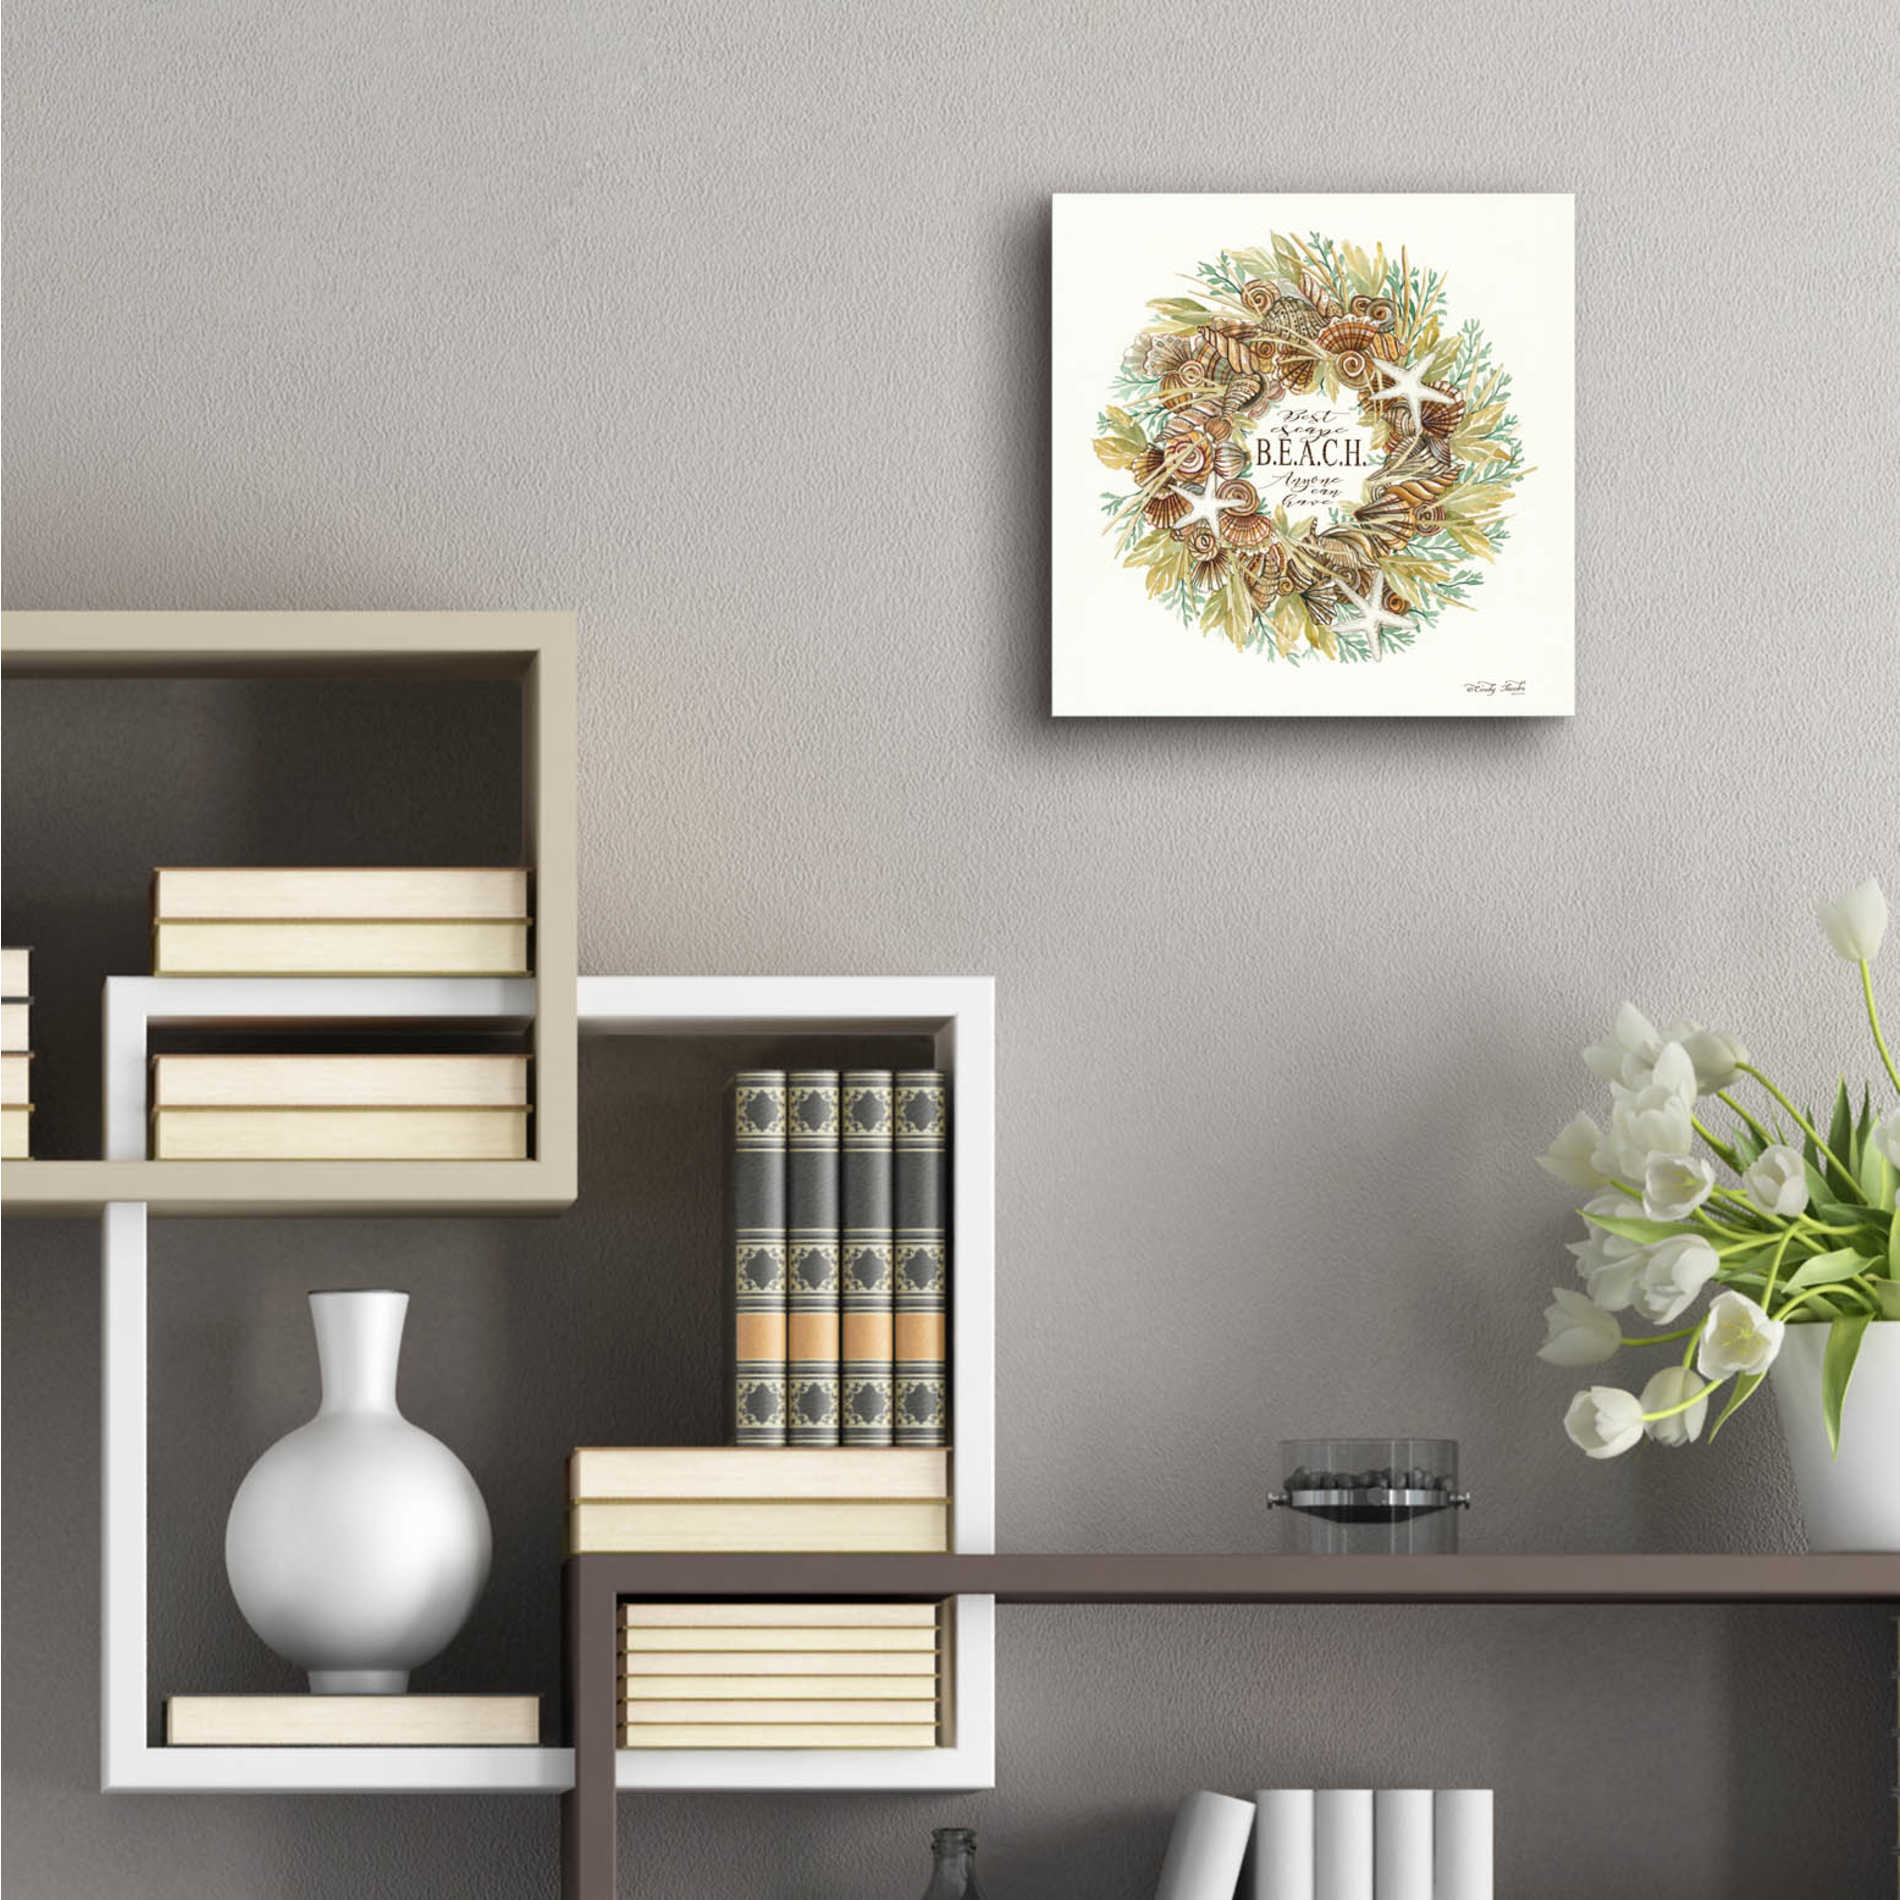 Epic Art 'Best Escape Shell Wreath' by Cindy Jacobs, Acrylic Glass Wall Art,12x12